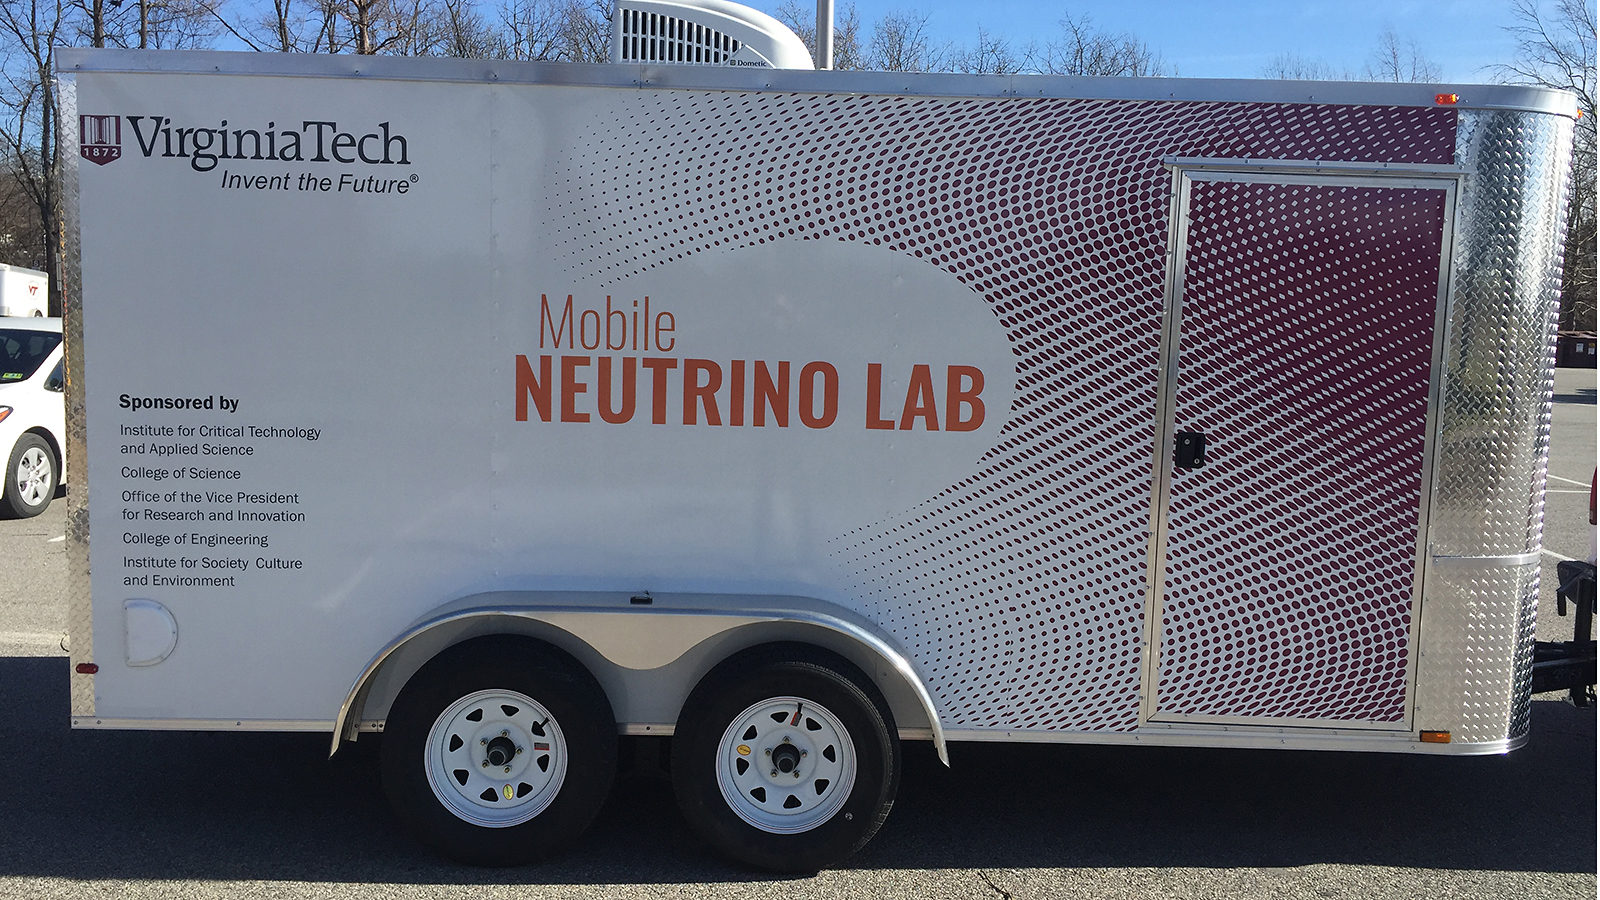 White trailer with the words "Mobile Neutrino Lab" on the side